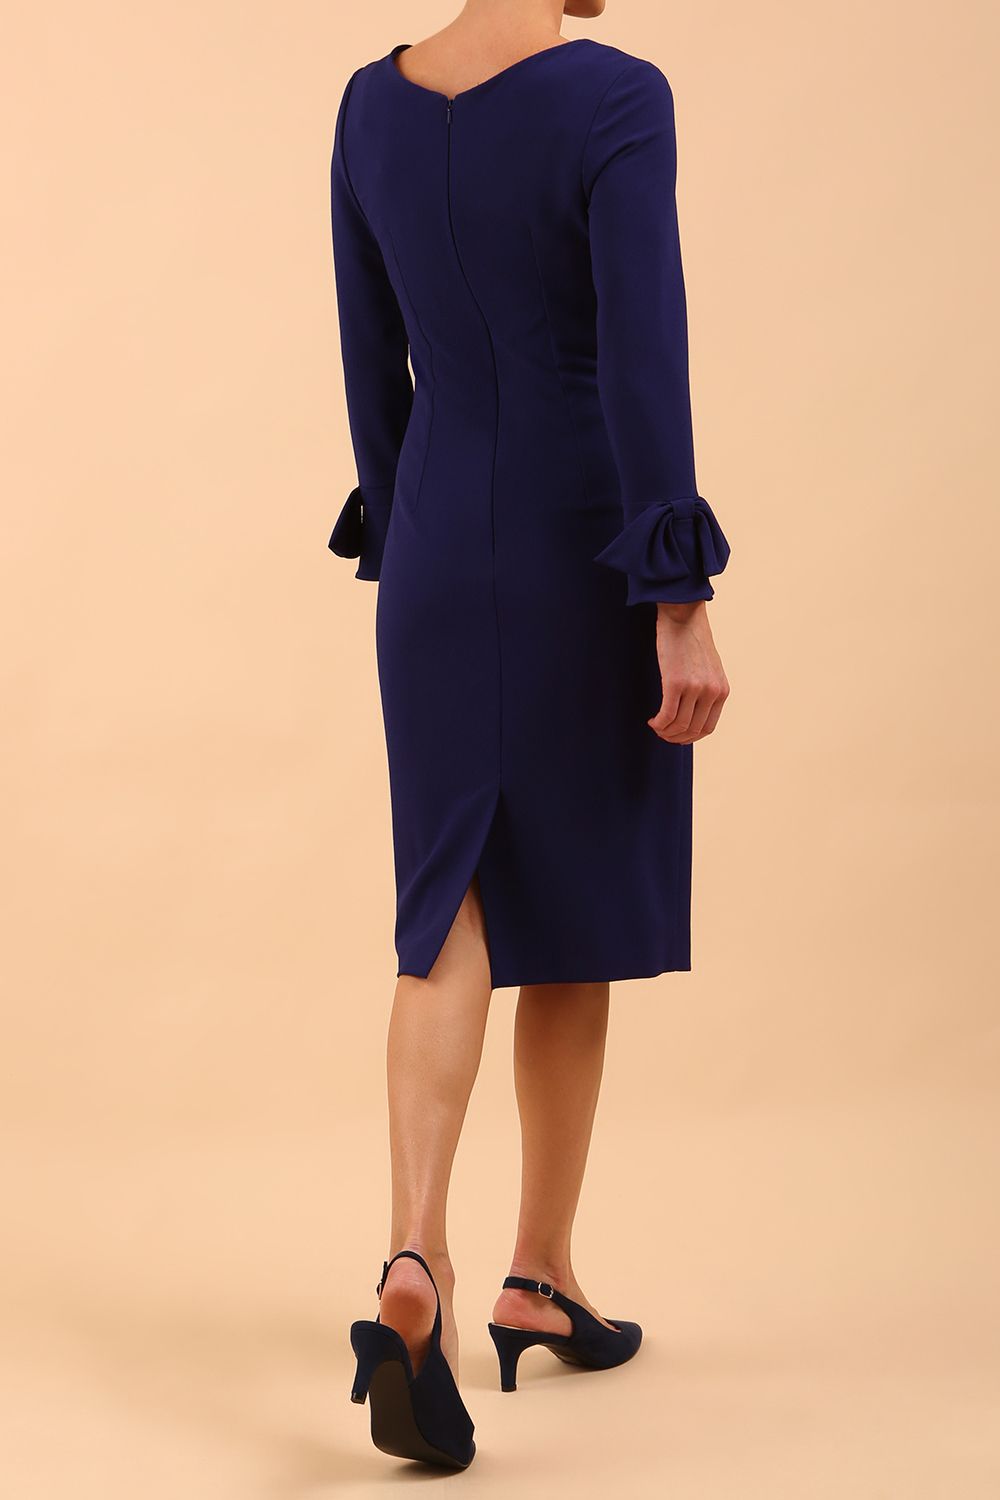 brunette model wearing diva catwalk fitted dress with sleeves called Alma Pencil-skirt dress in colour oxford blue with bow detail on sleeves back